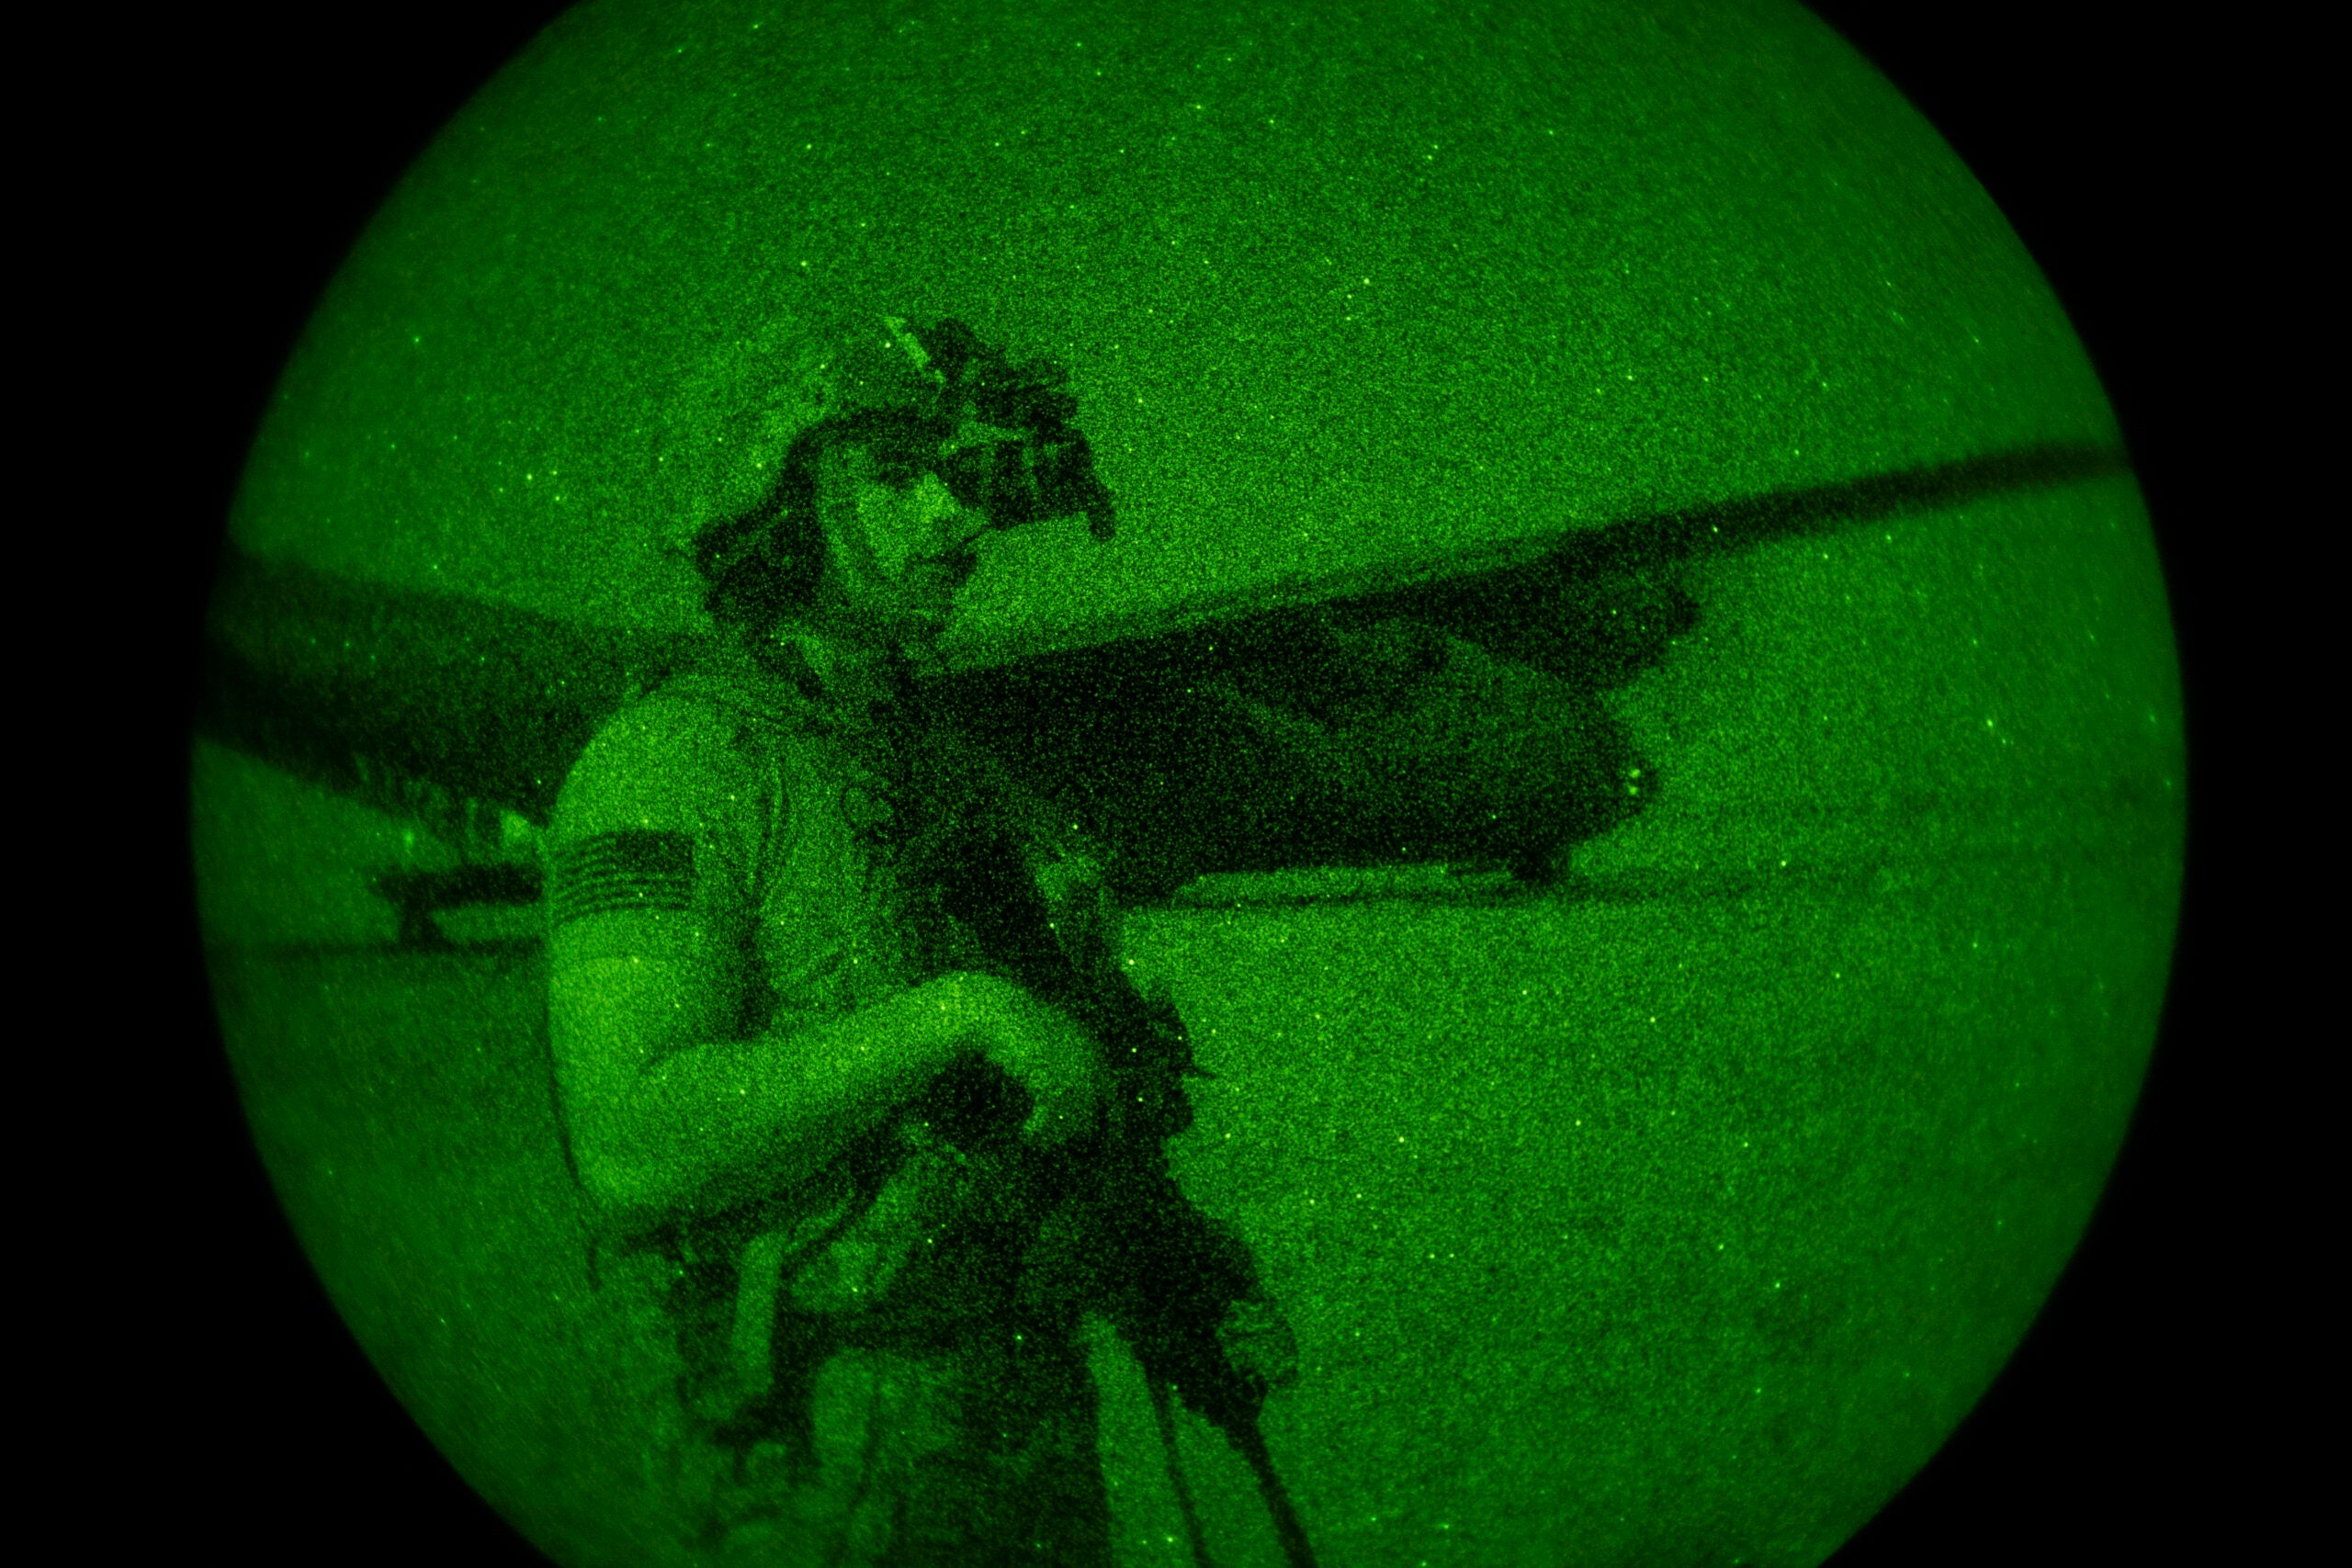 U.S. Army Spc. Dominic Deitrick, assigned to the 1-186th Infantry Battalion, Task Force Guardian, Combined Joint Task Force - Horn of Africa, seen through a night-vision device, provides security for a 75th Expeditionary Airlift Squadron (EAS) C-130J Super Hercules during unloading and loading operations Friday, June 12, 2020 at an unidentified location in Somalia. No country has been involved in Somalia's future as much as the United States but now the Trump administration is thinking of withdrawing the several hundred U.S. military troops from the nation at what some experts call the worst possible time. (Tech. Sgt. Christopher Ruano/Combined Joint Task Force - Horn of Africa via AP)